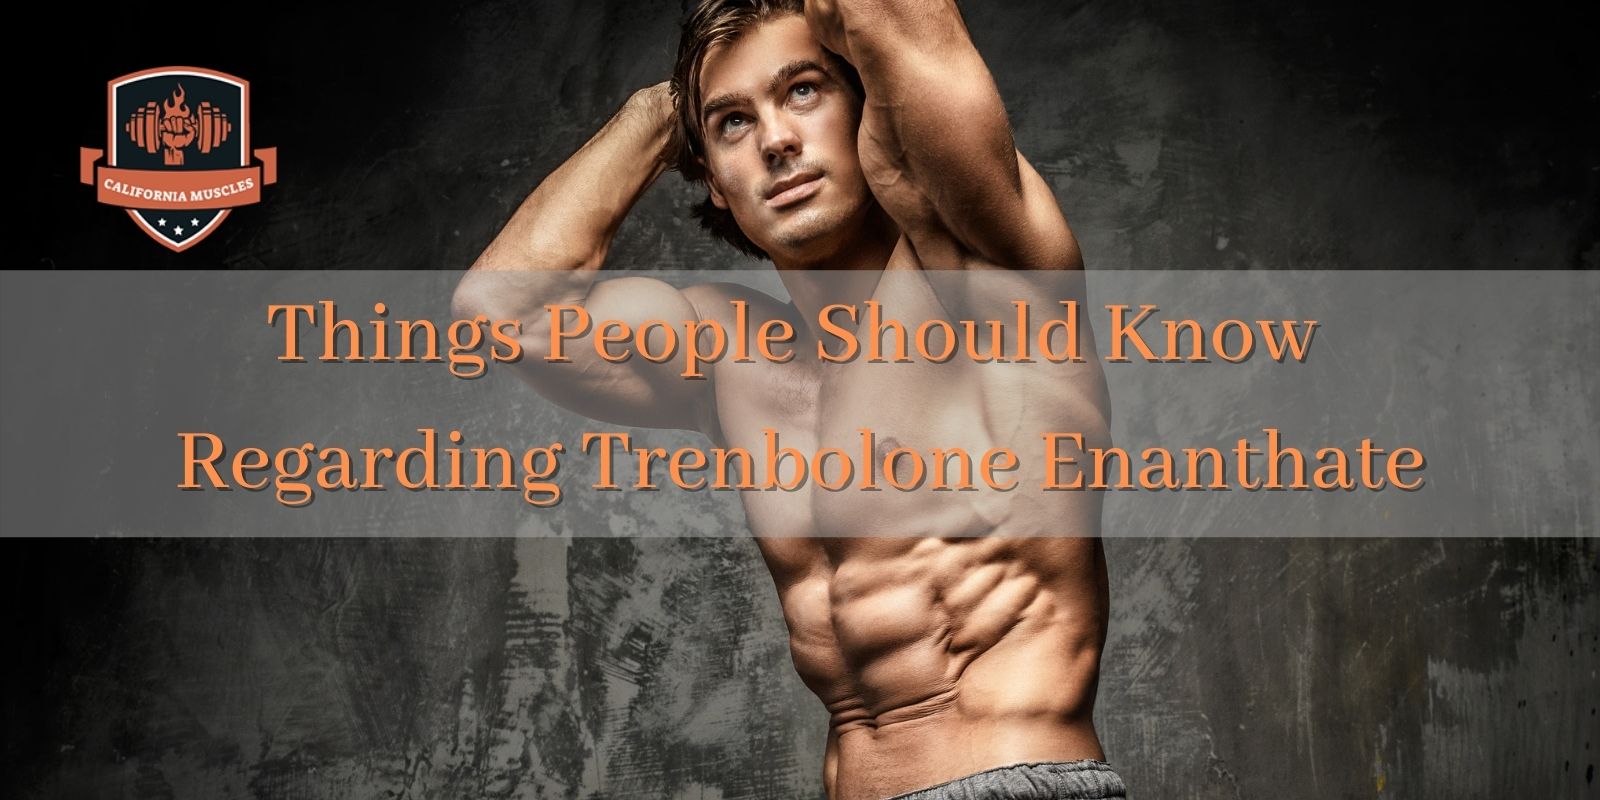 Things People Should Know Regarding Trenbolone Enanthate